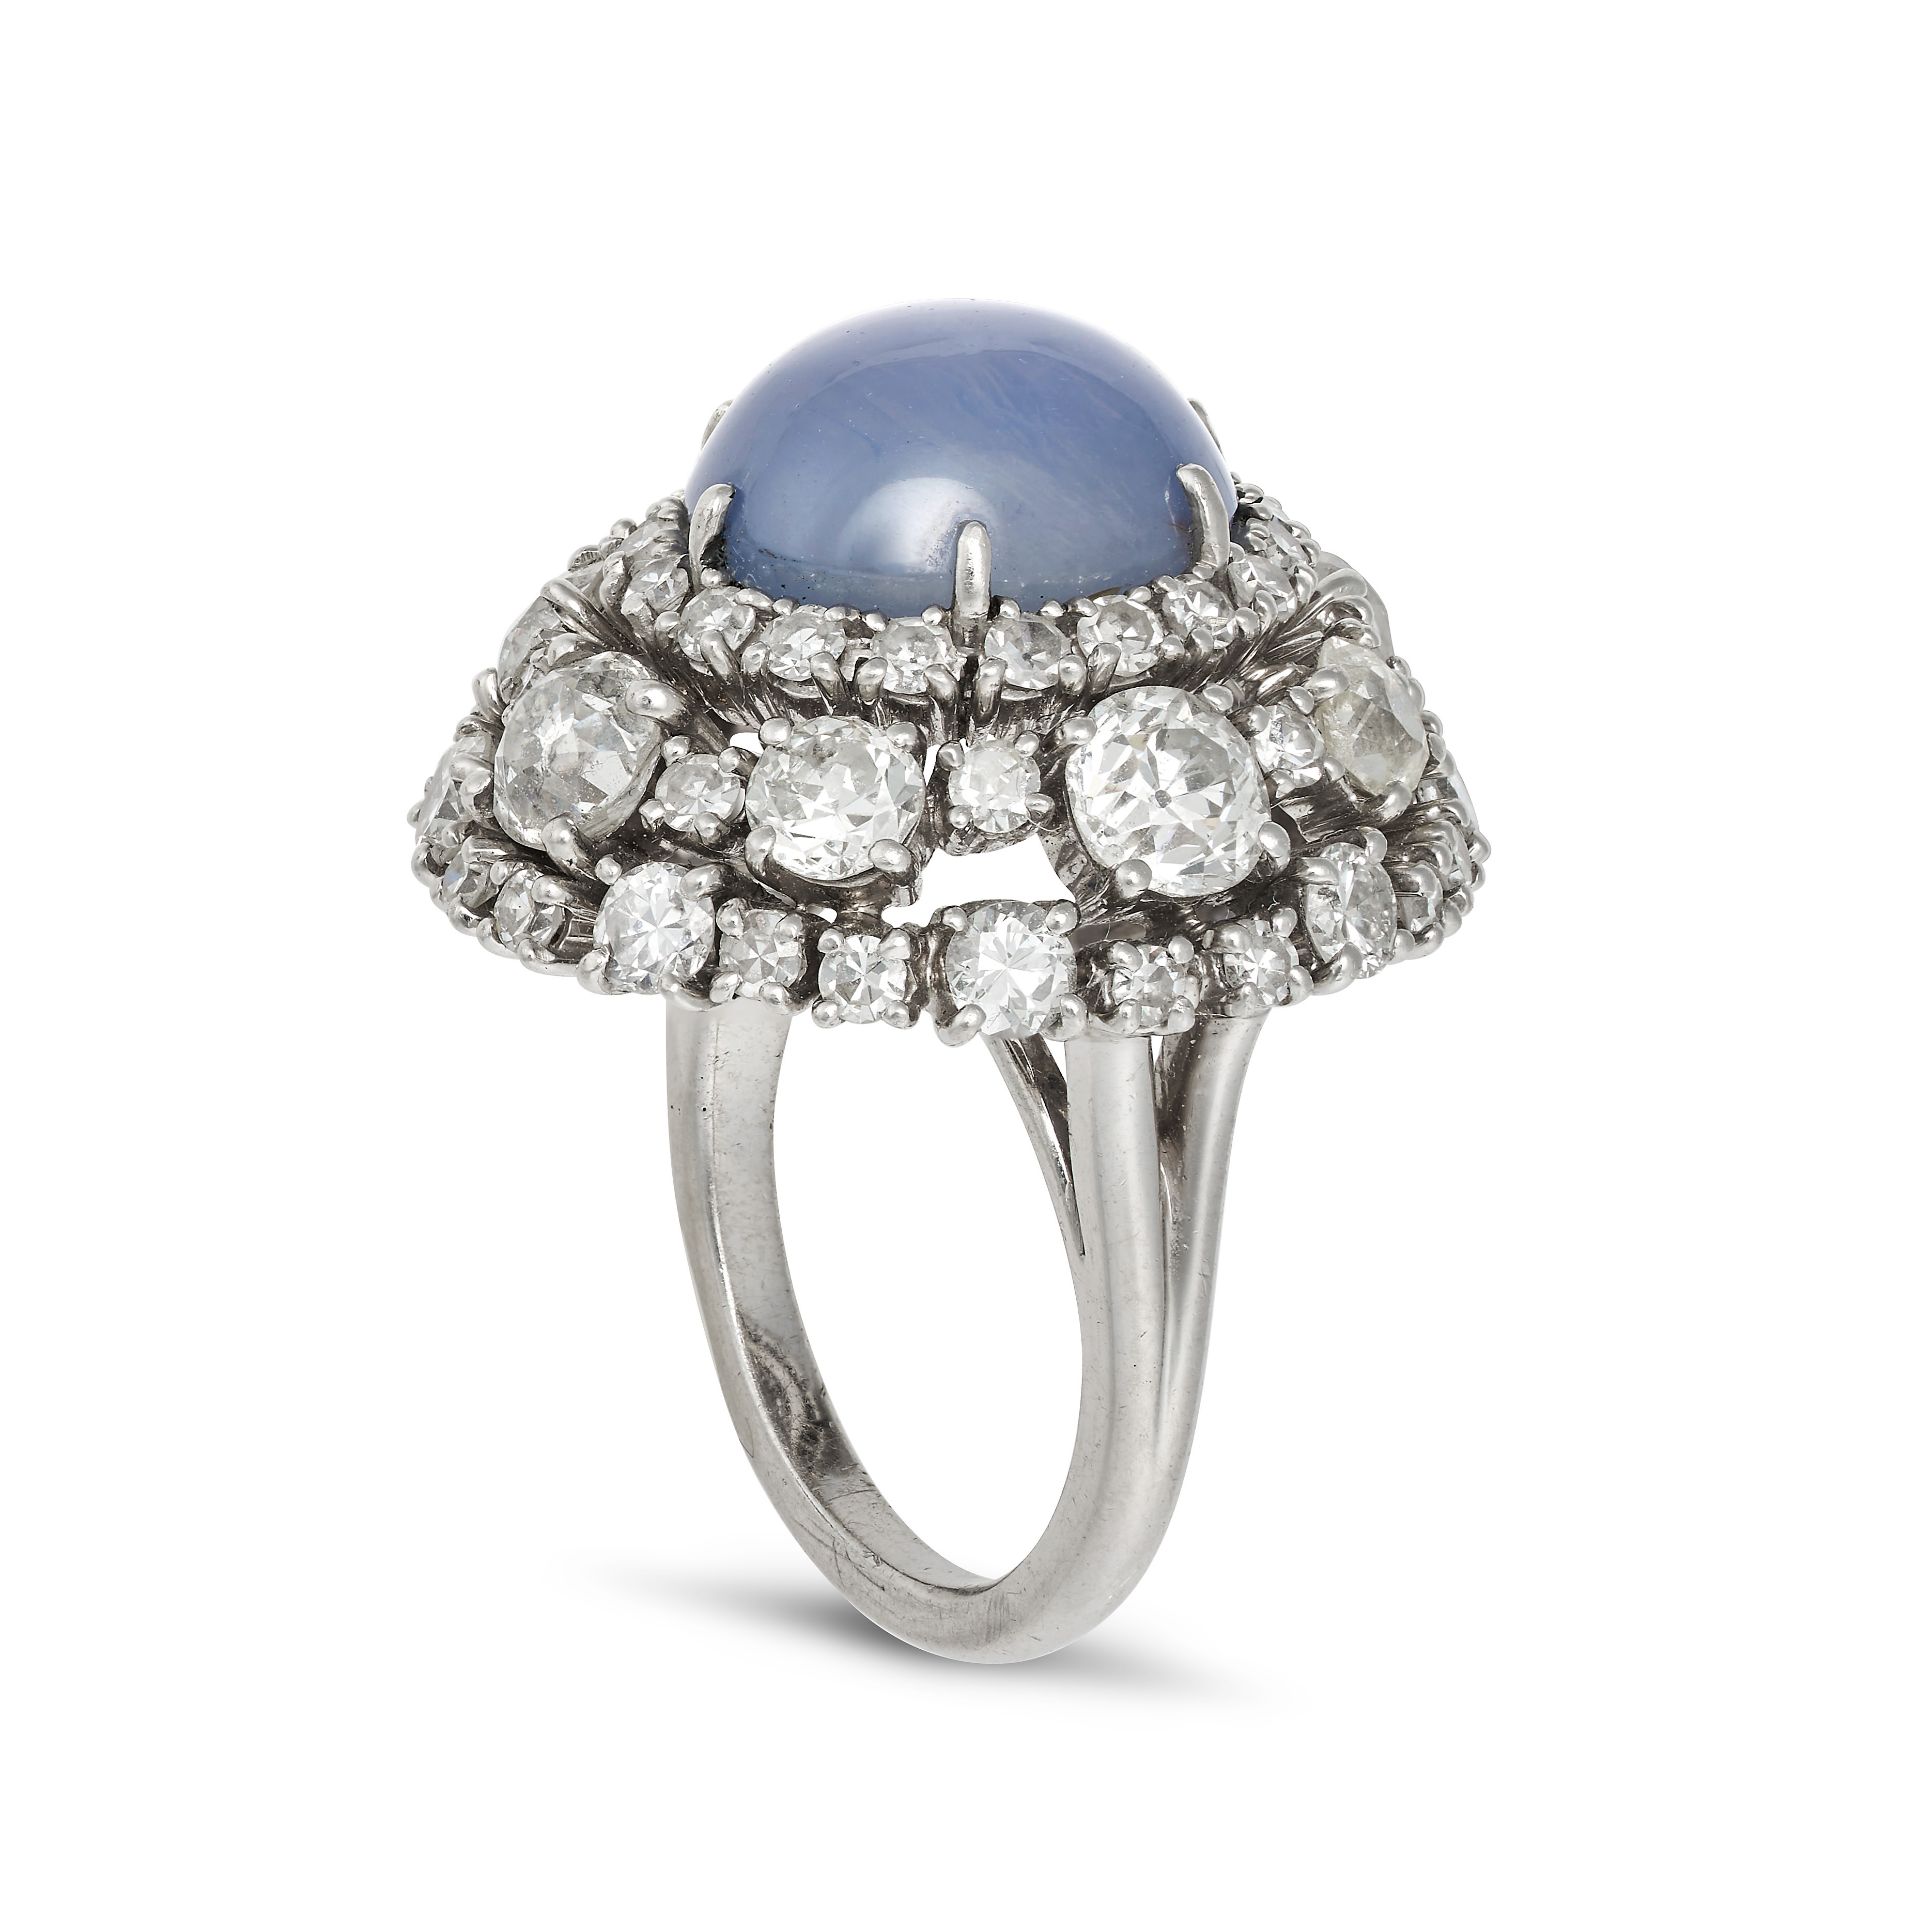 A STAR SAPPHIRE AND DIAMOND DRESS RING in platinum, set with an oval cabochon star sapphire of ap... - Image 2 of 2